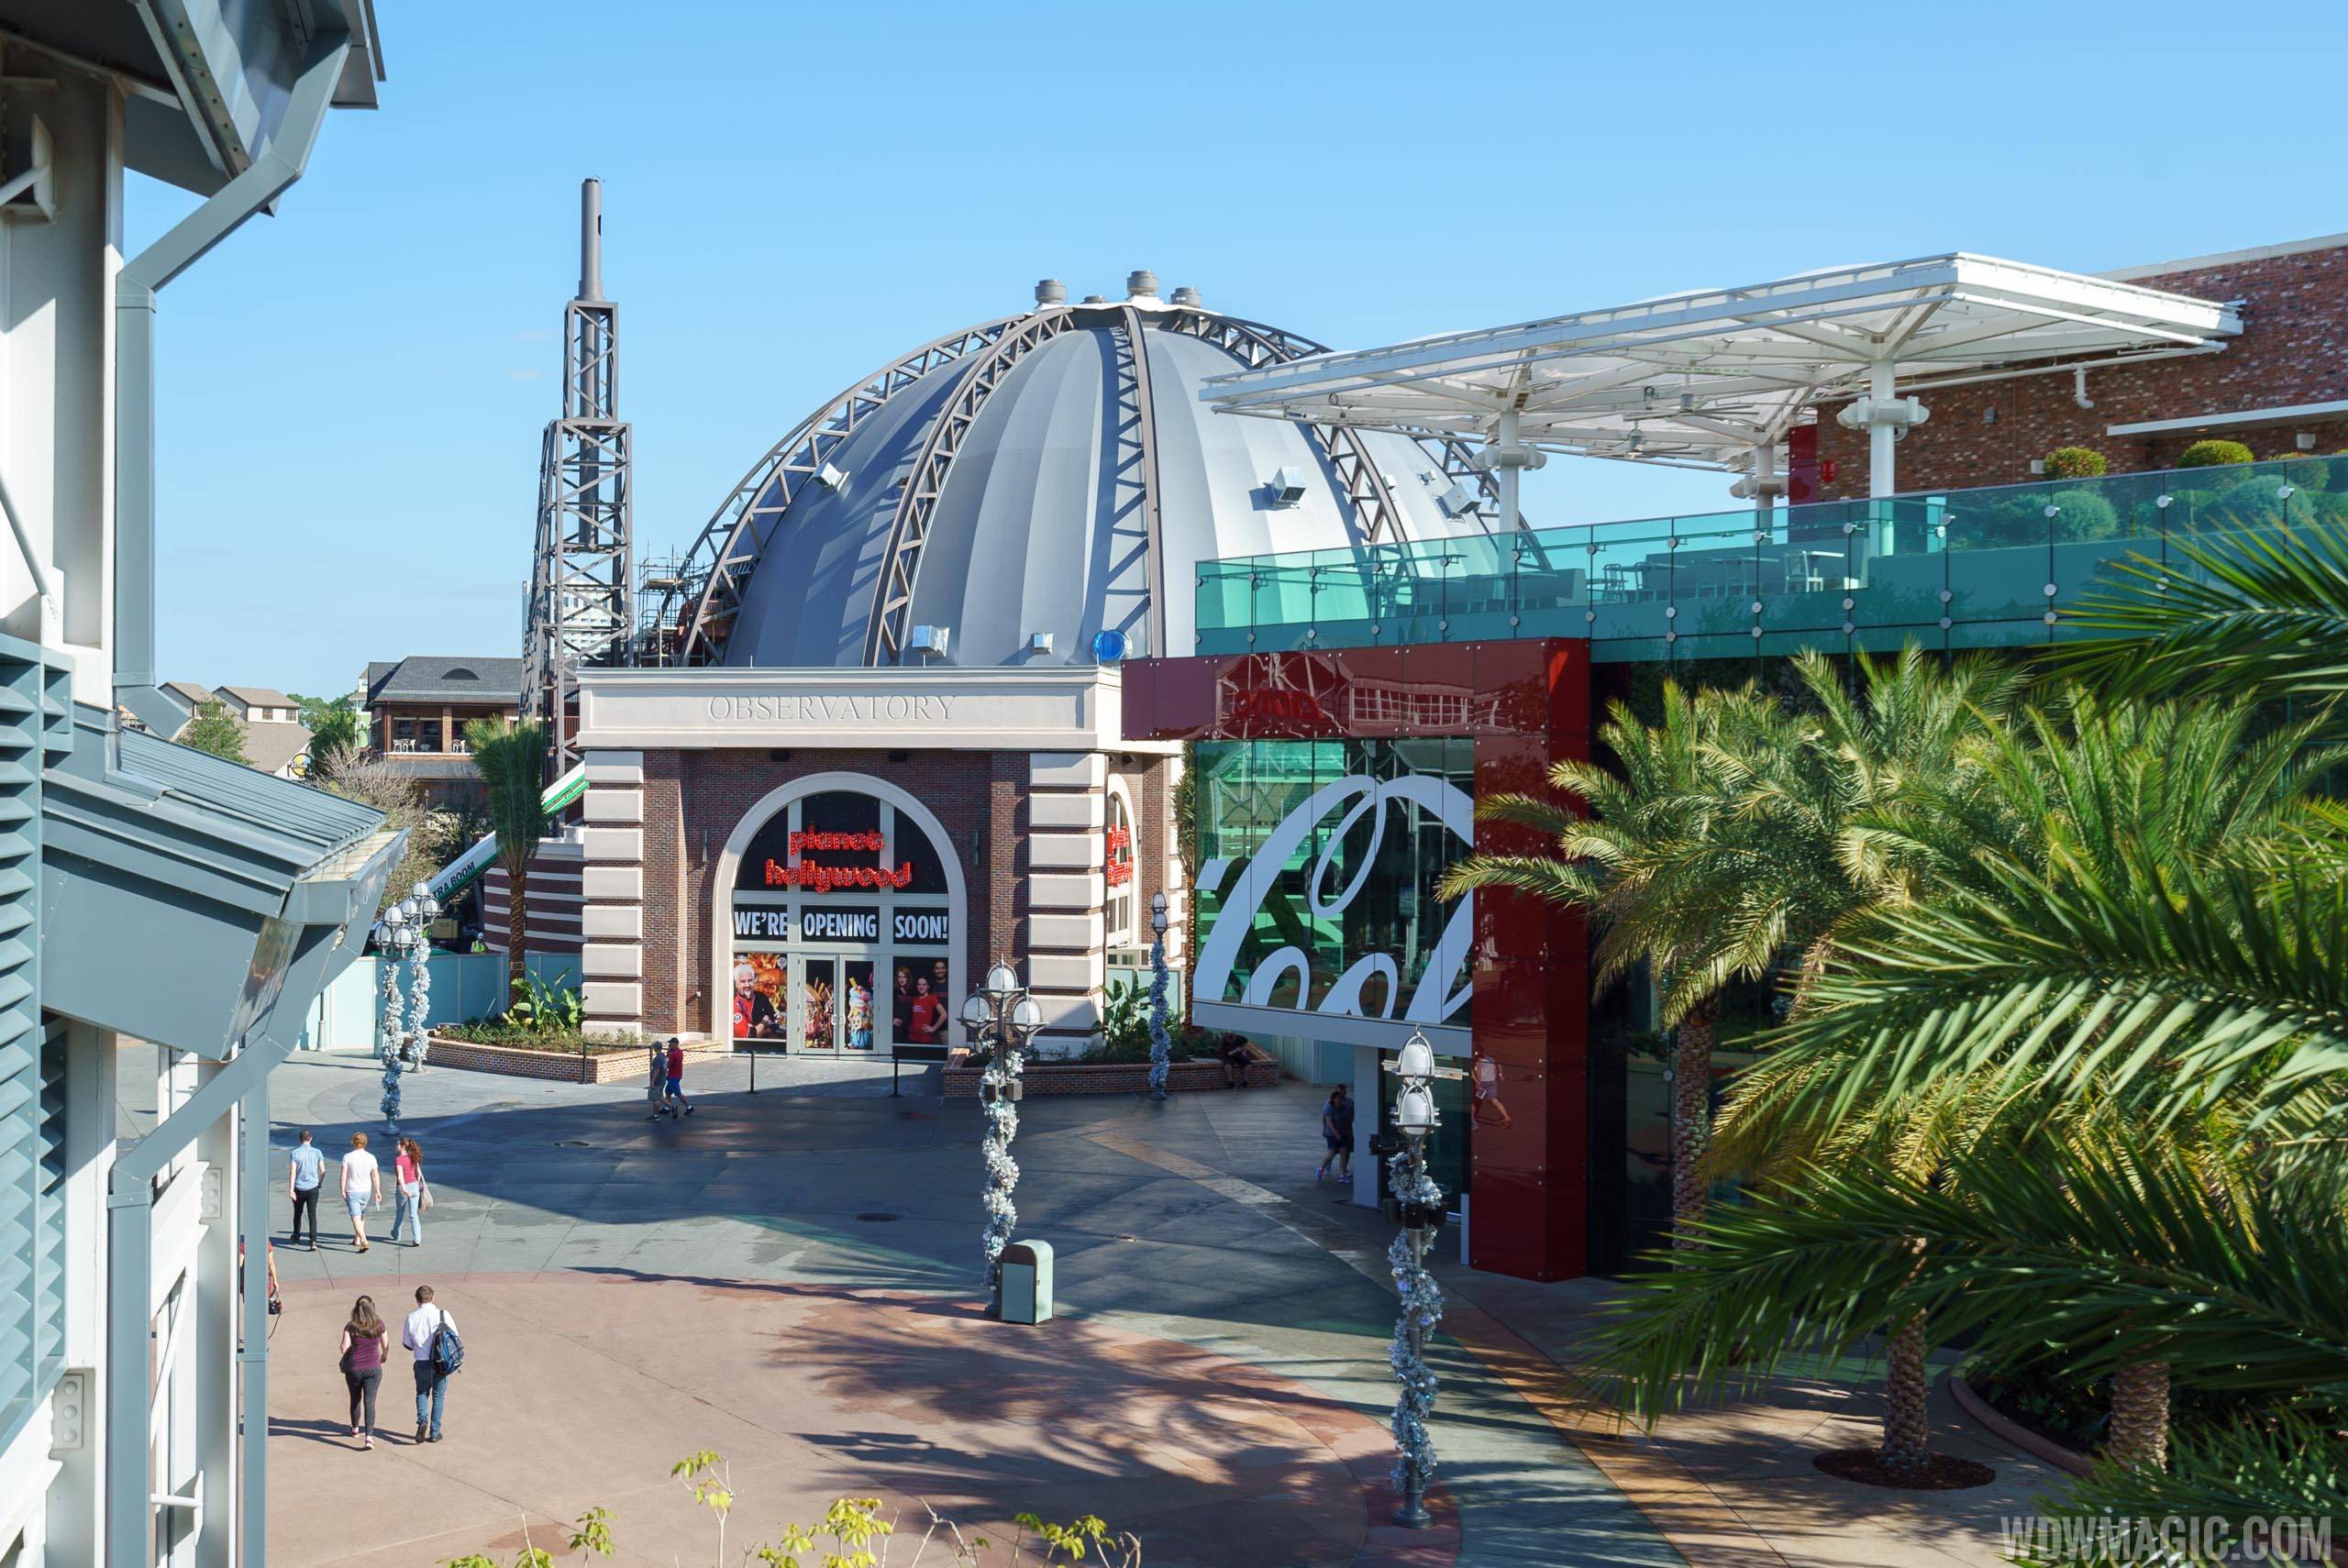 PHOTOS - Planet Hollywood Observatory construction at Disney Springs